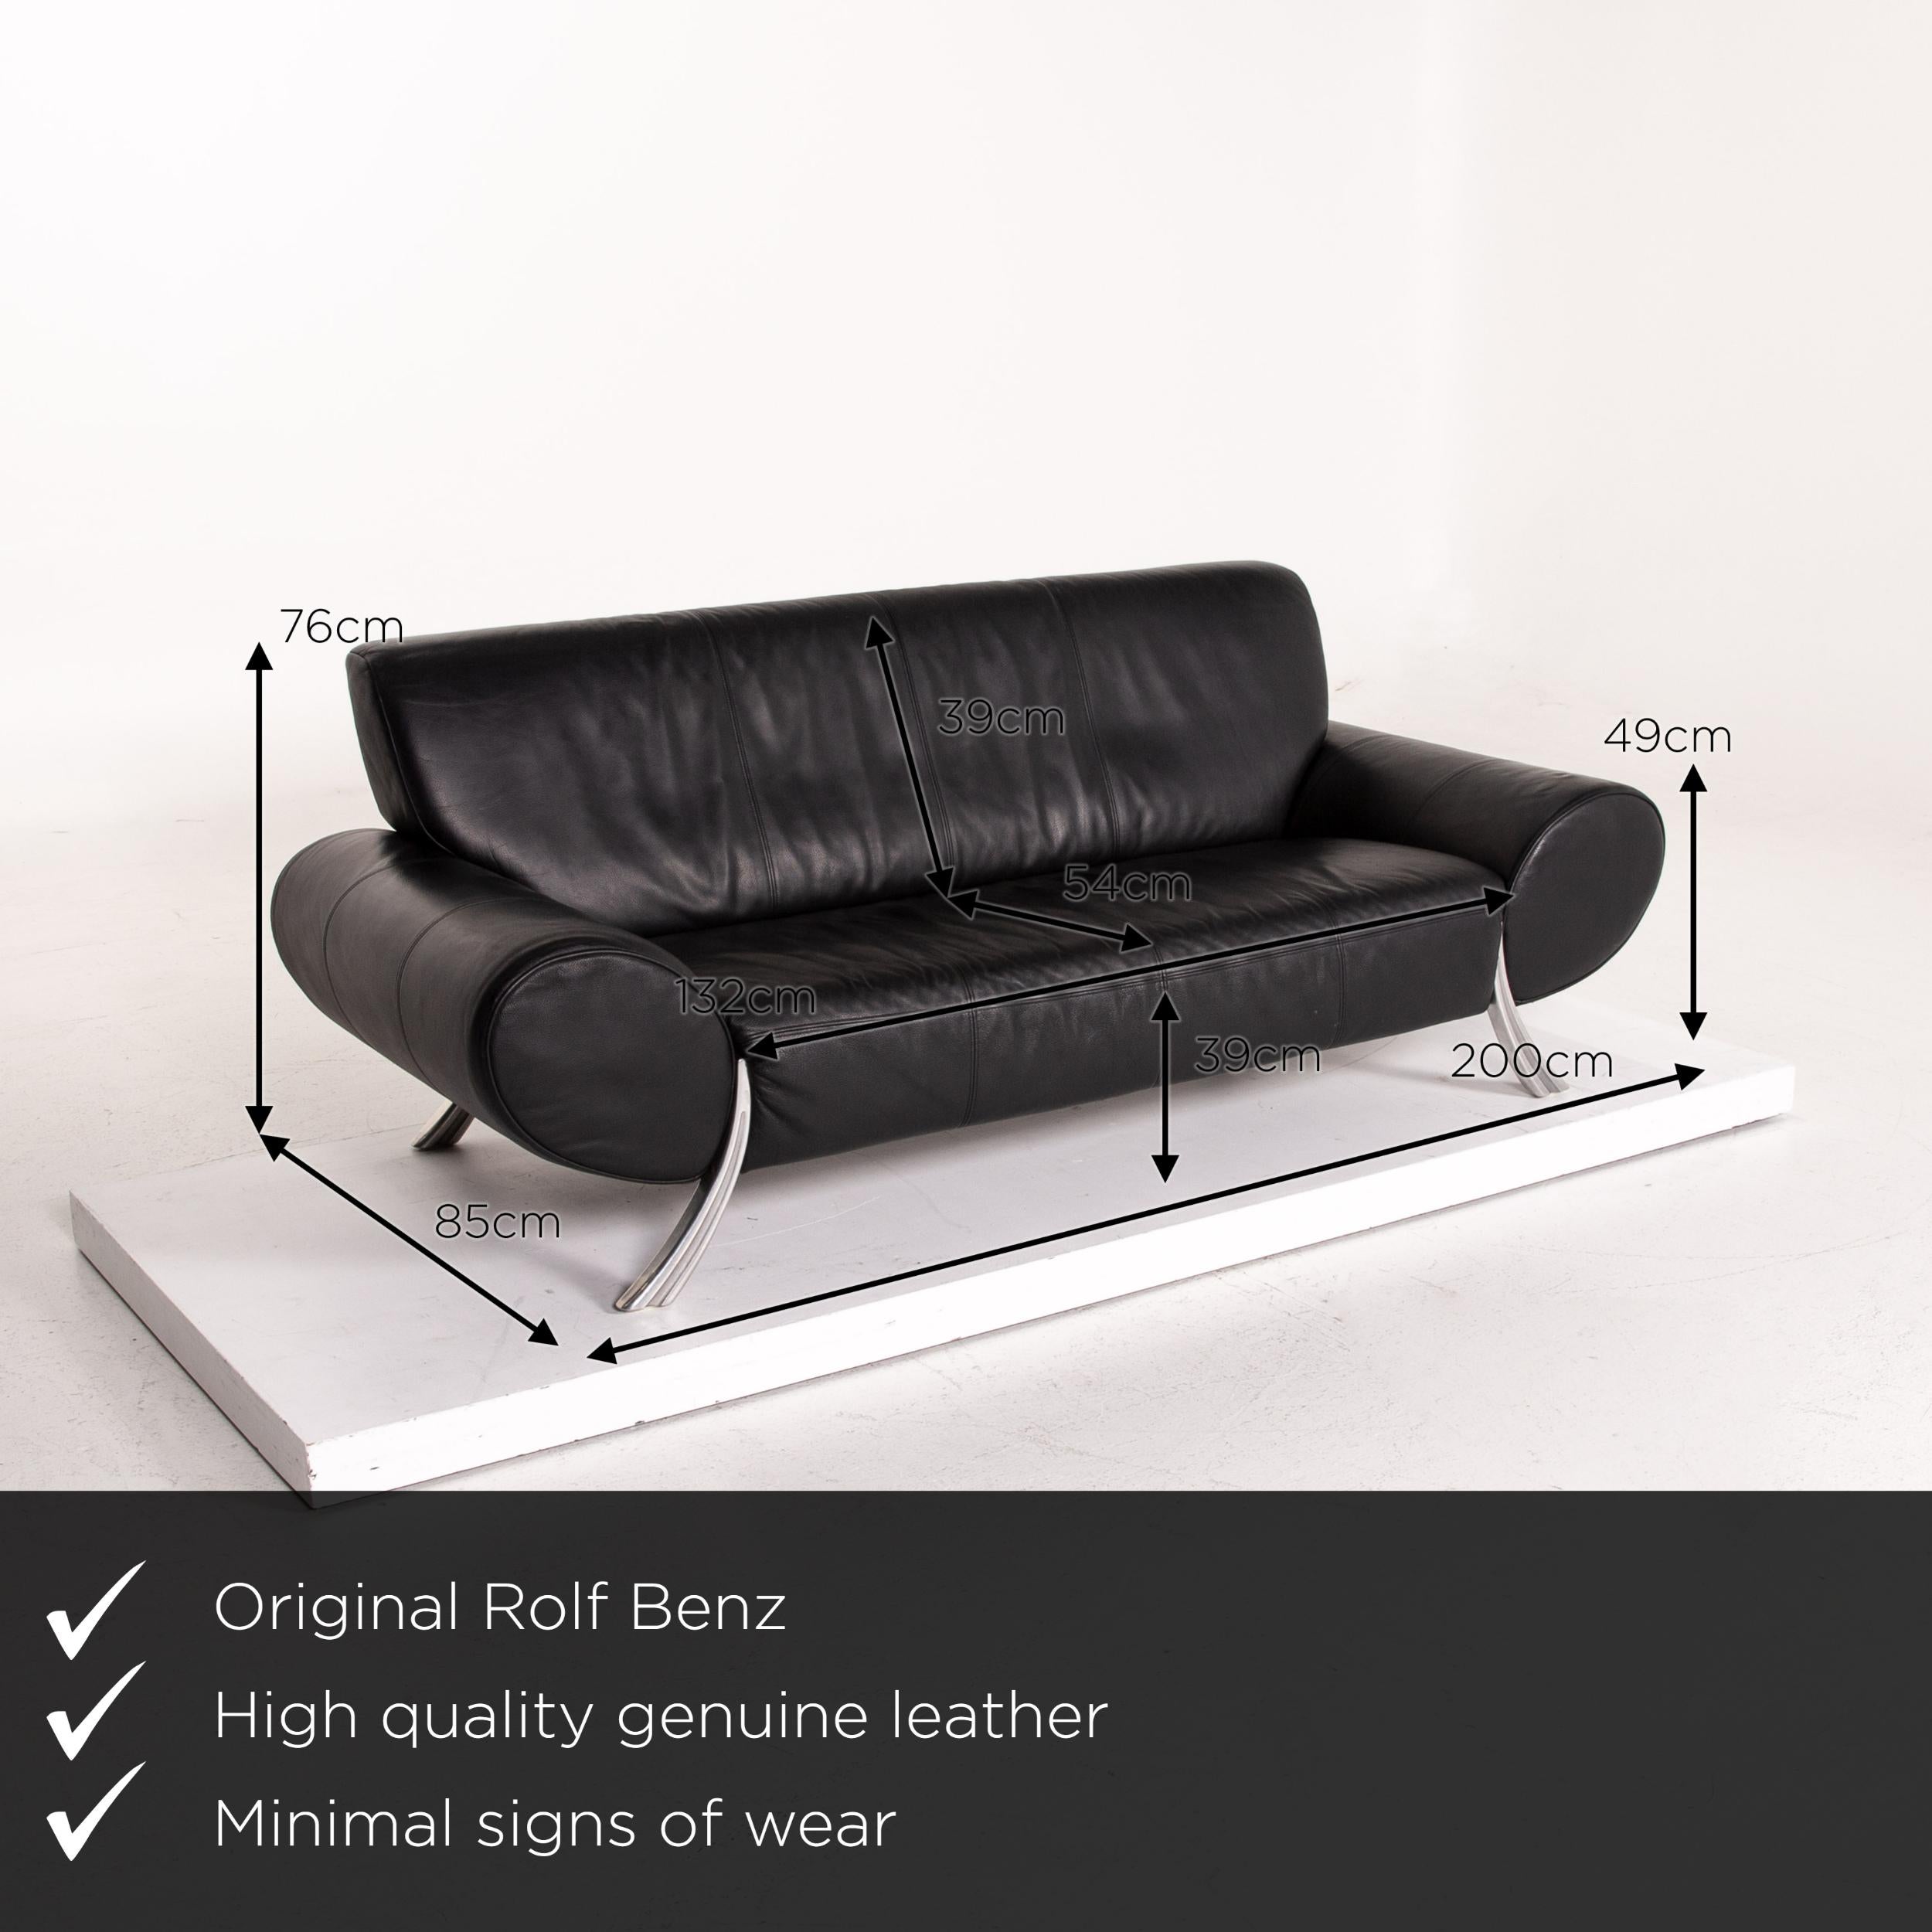 We present to you a Rolf Benz leather sofa black three-seat couch.
 

 Product measurements in centimeters:
 

Depth 85
Width 200
Height 76
Seat height 39
Rest height 49
Seat depth 54
Seat width 132
Back height 39.
 